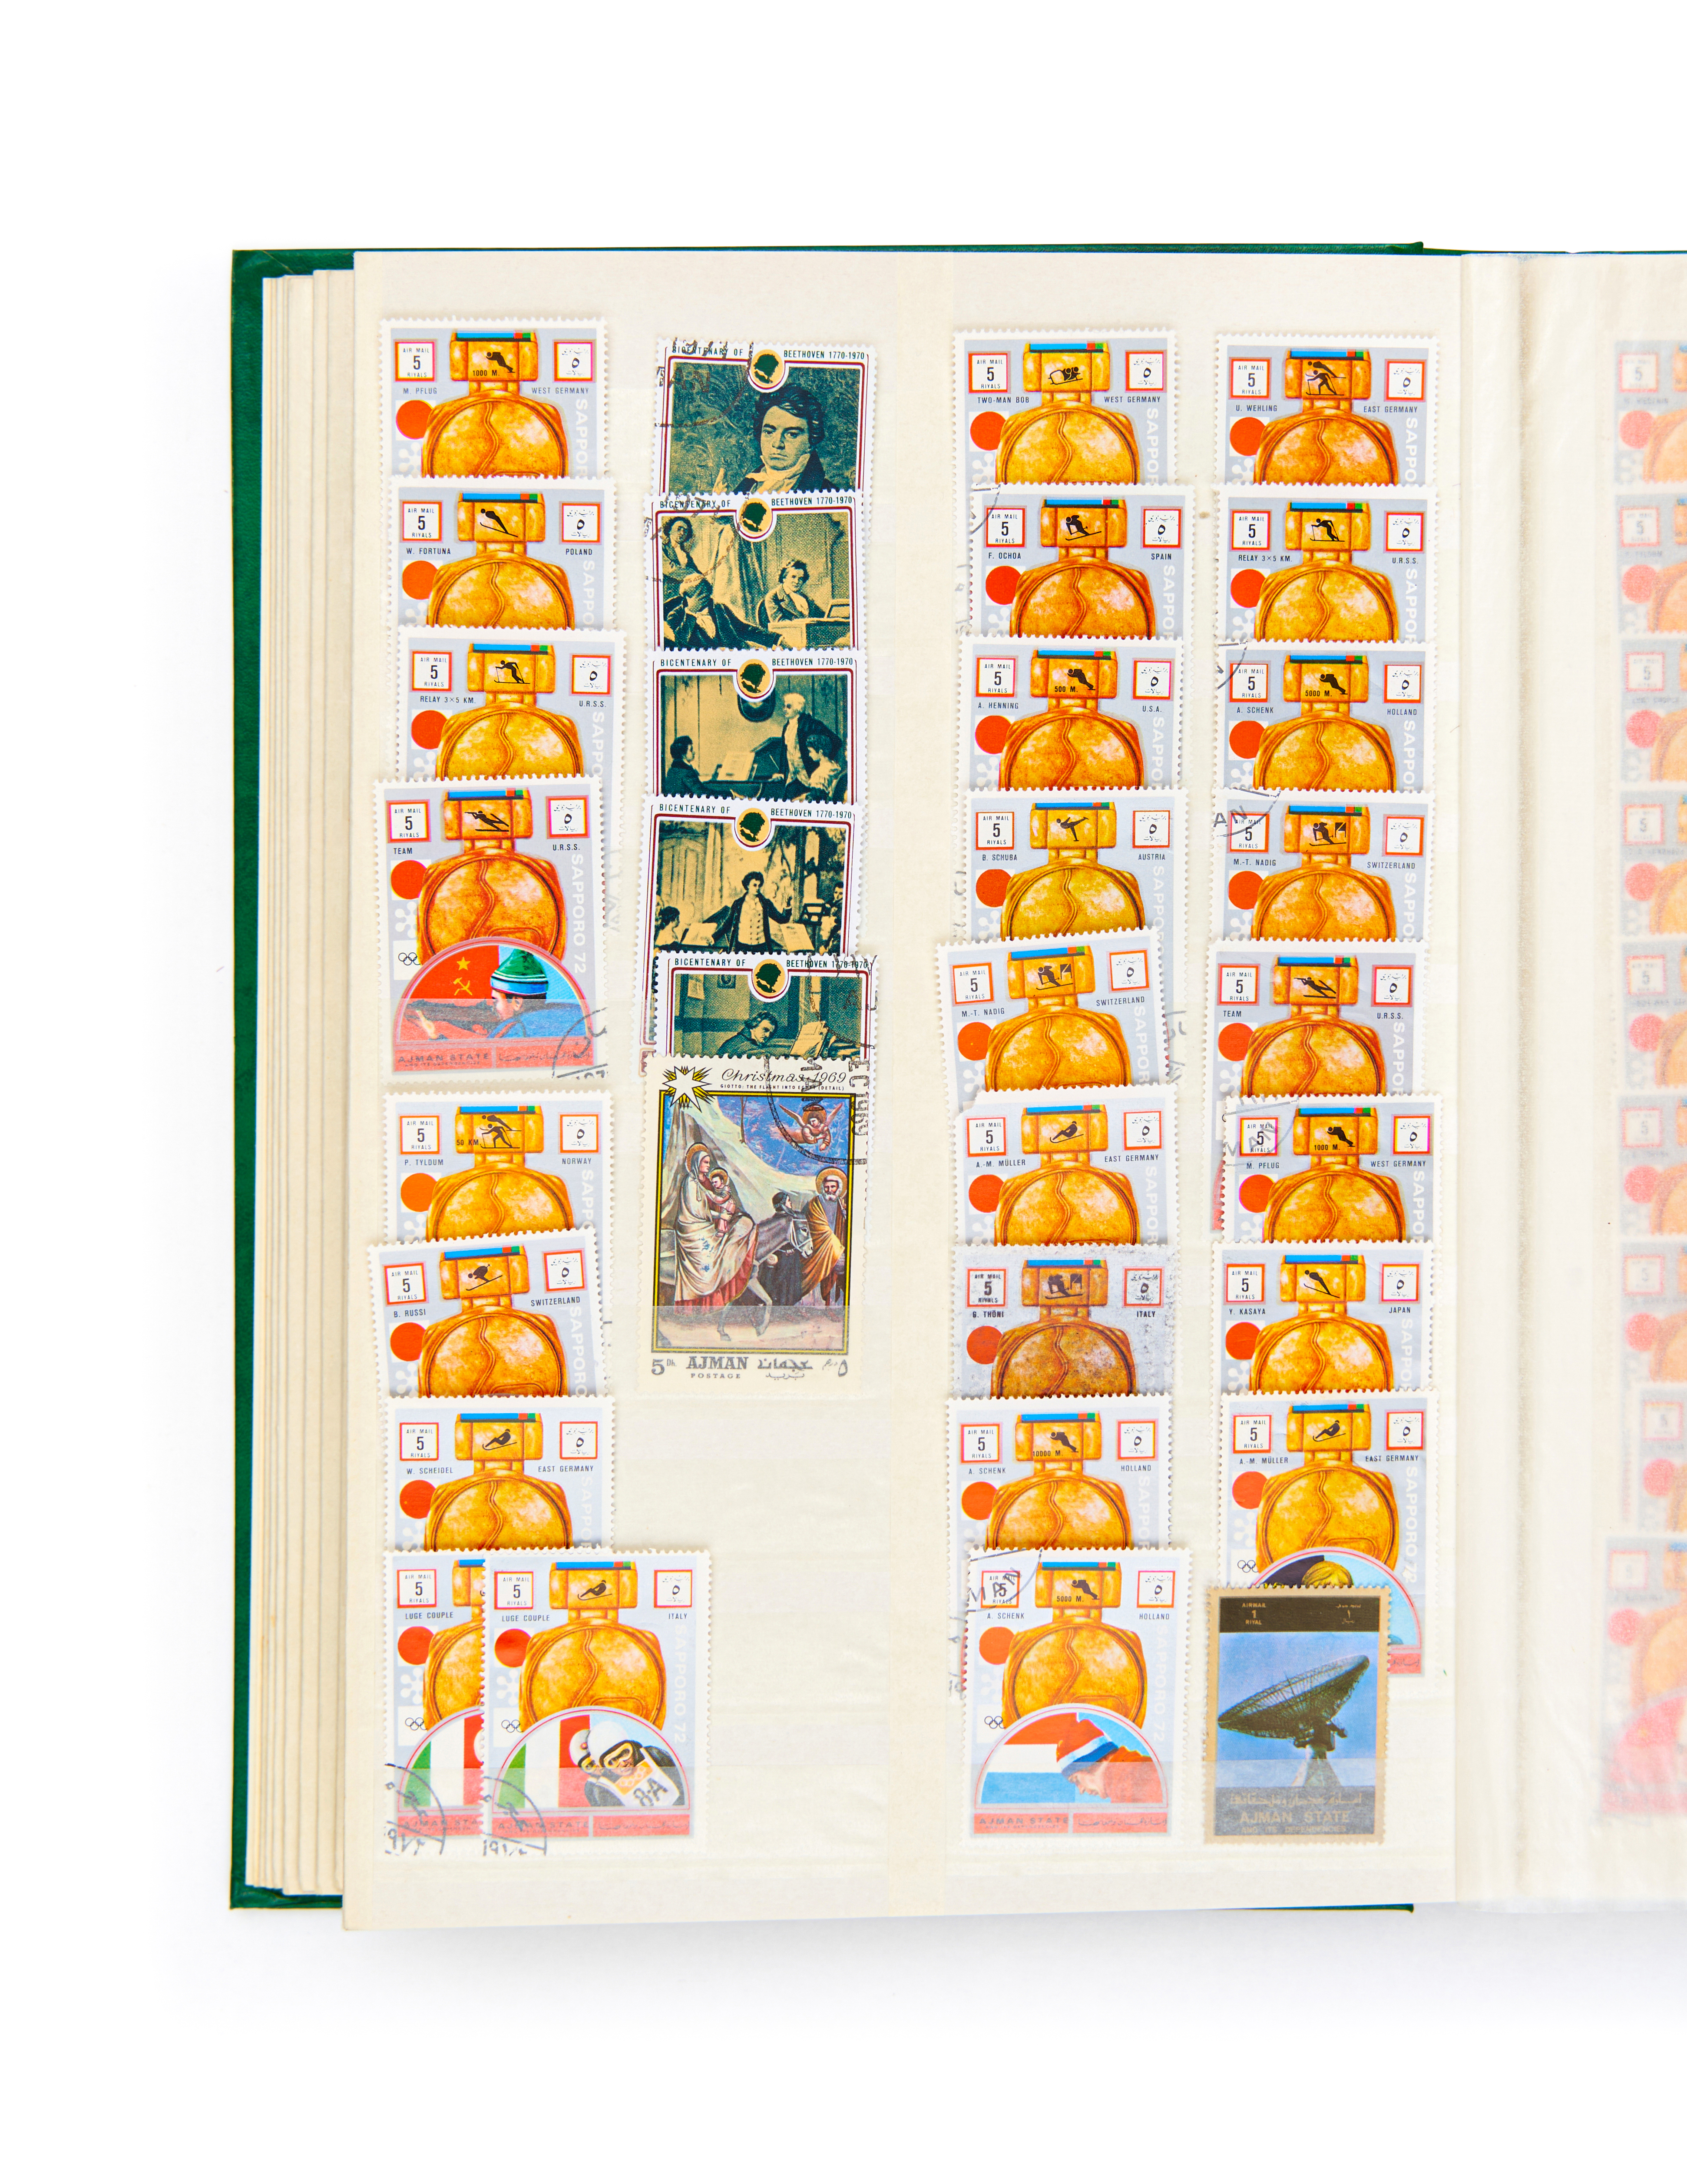 COLLECTION OF AJMAN (UNITED ARAB EMIRATES) POSTAGE STAMPS - Image 36 of 52